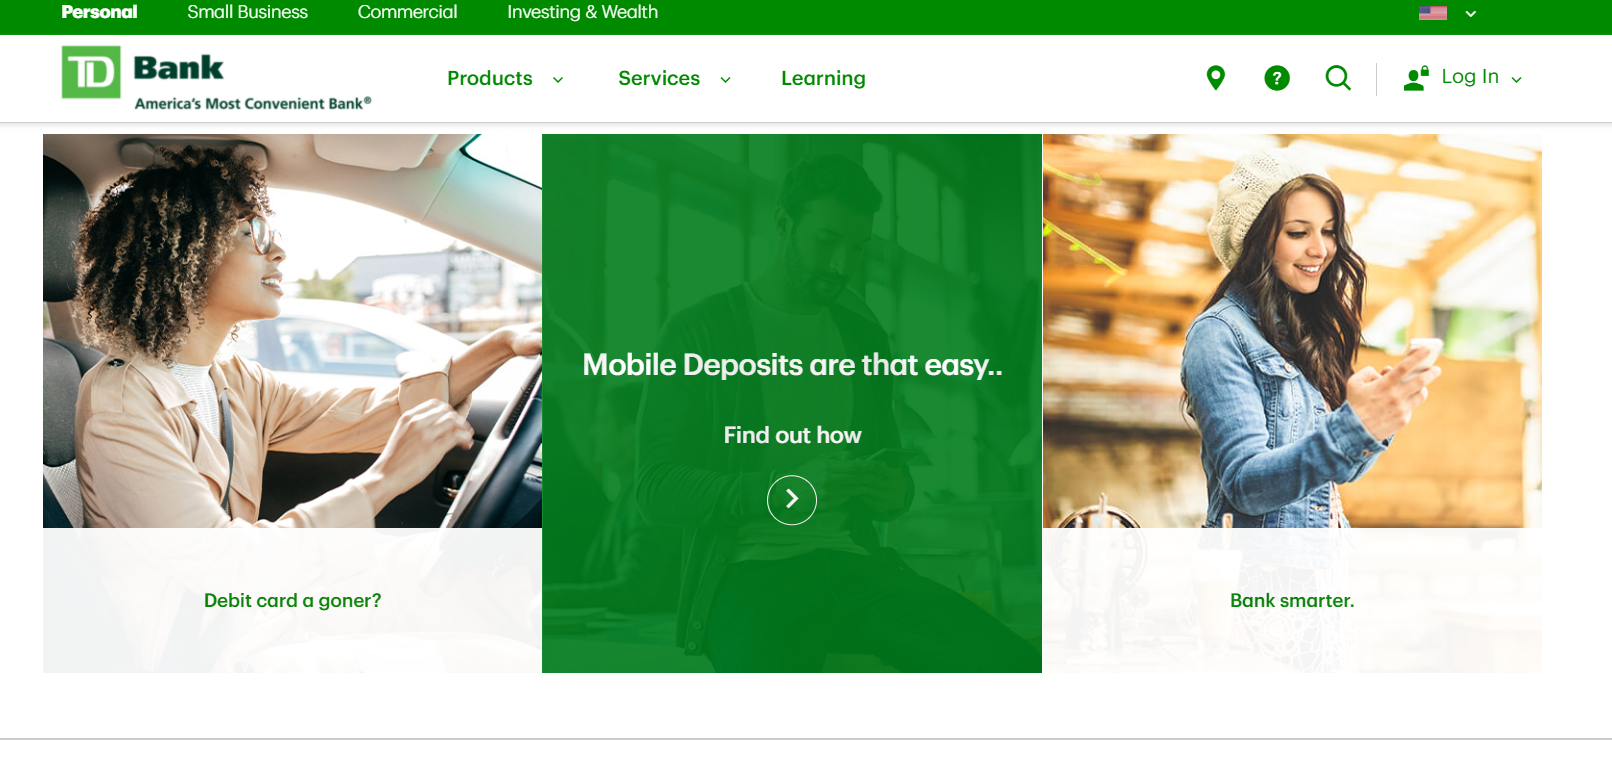 TD Bank uses green with graphic images to encourage engagement